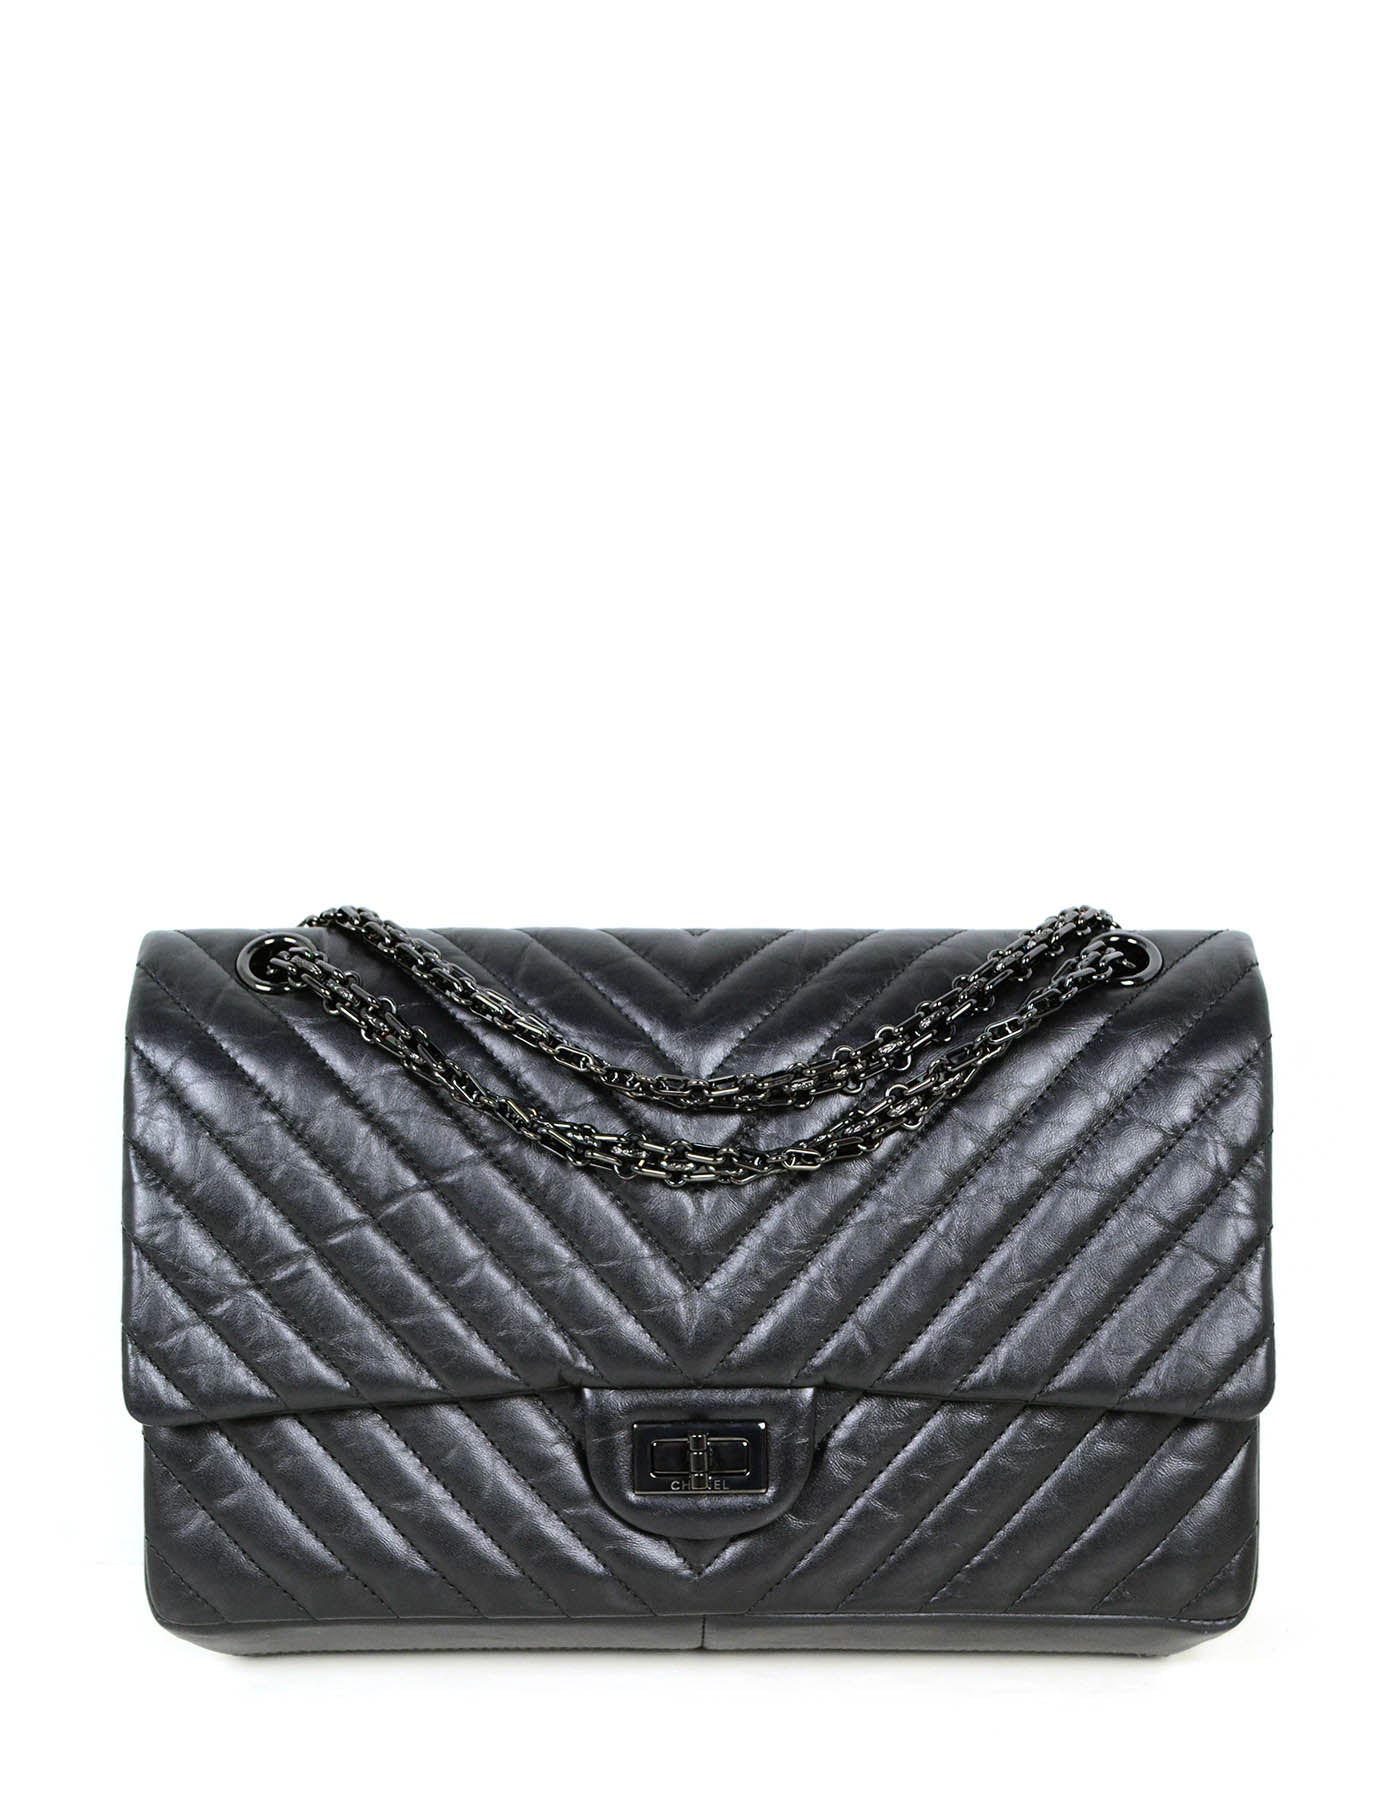 Chanel So Black Calfskin Quilted 2.55 Reissue 226 Flap Bag – ASC Resale